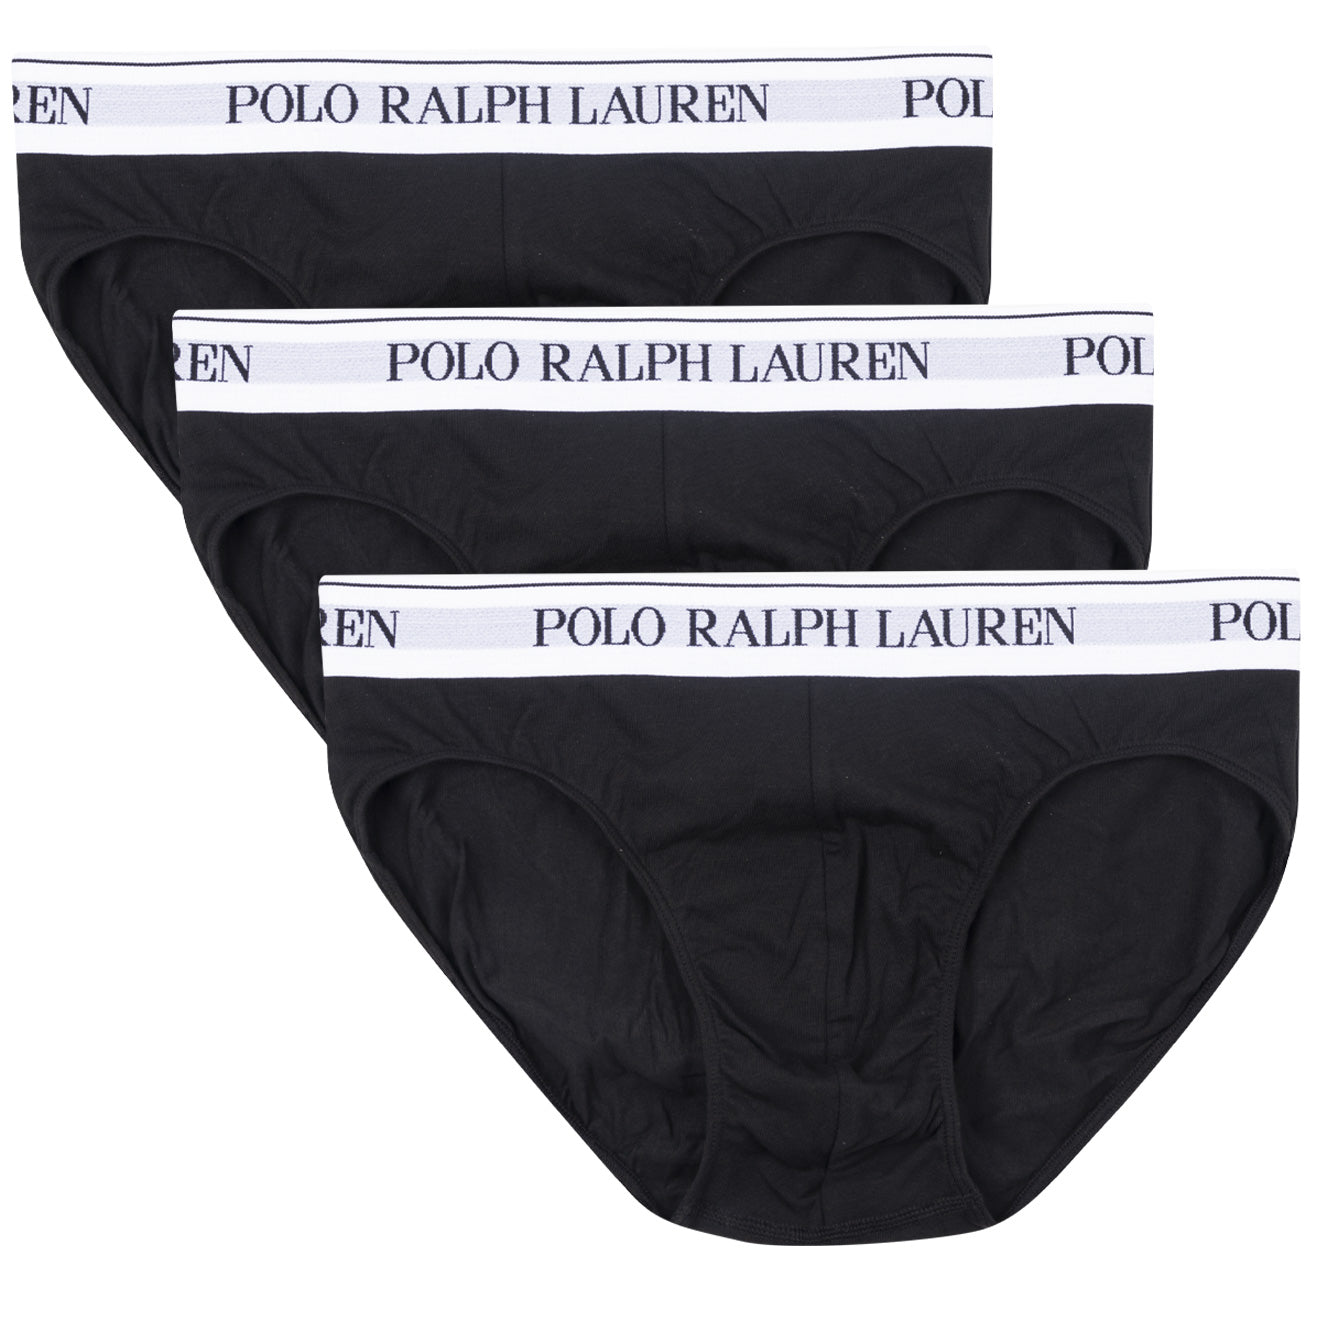 Polo Ralph Lauren Brief 3-Pack Black / White | The Sporting Lodge